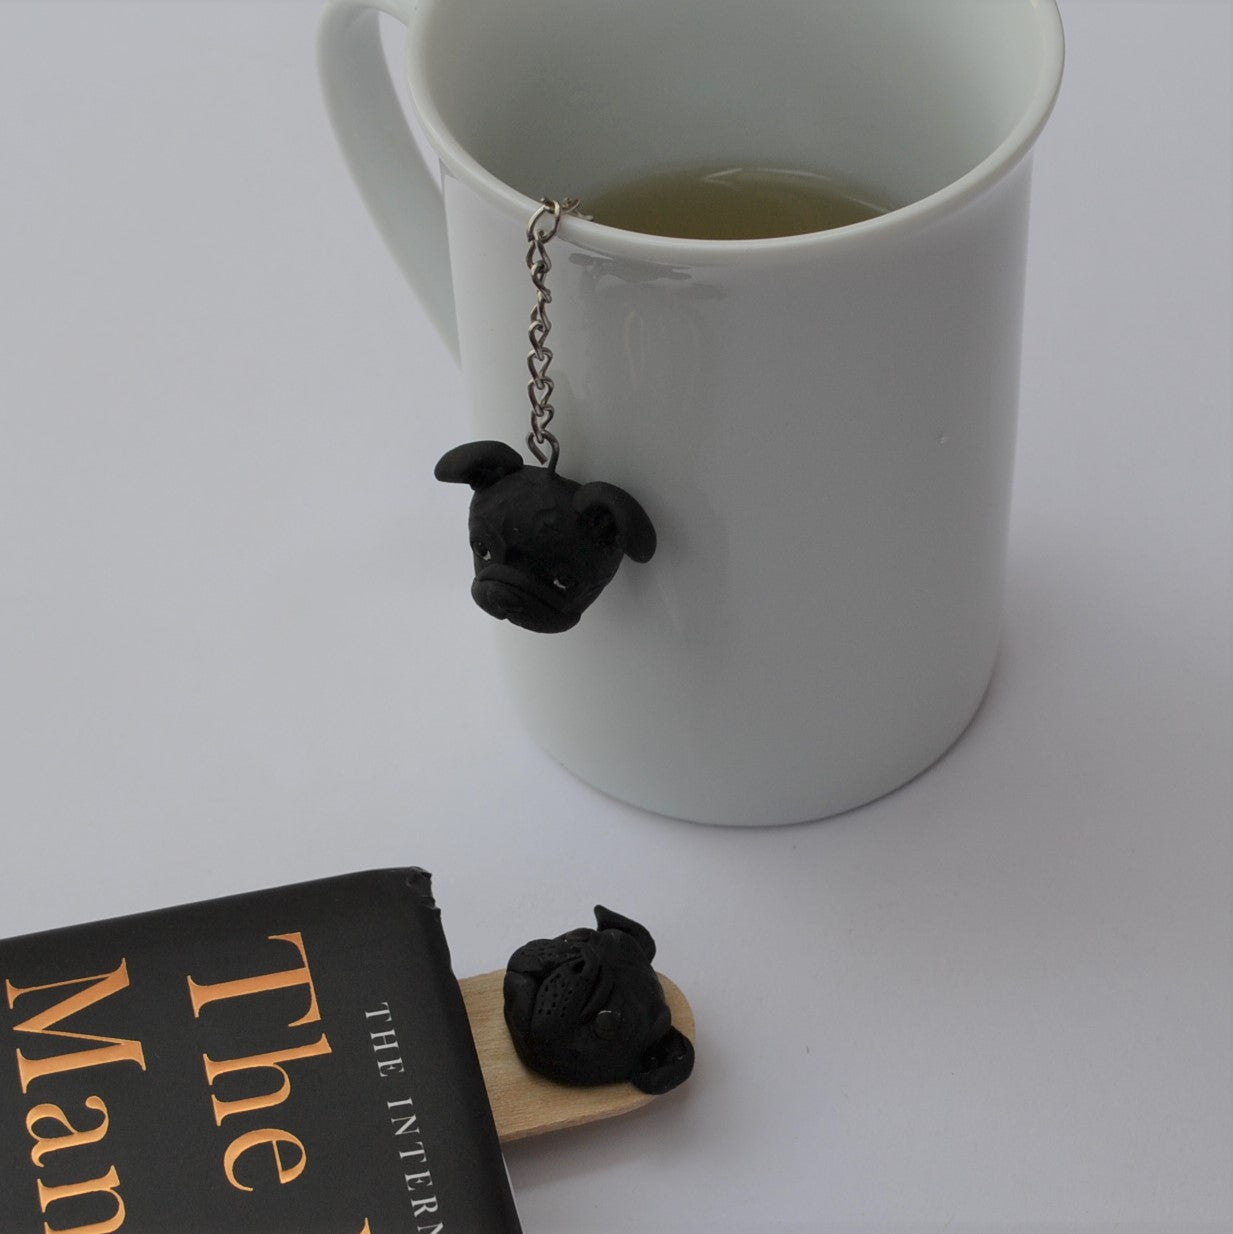 Handmade custom pet face page keeper showing a black pug's face, beside a cup of tea.